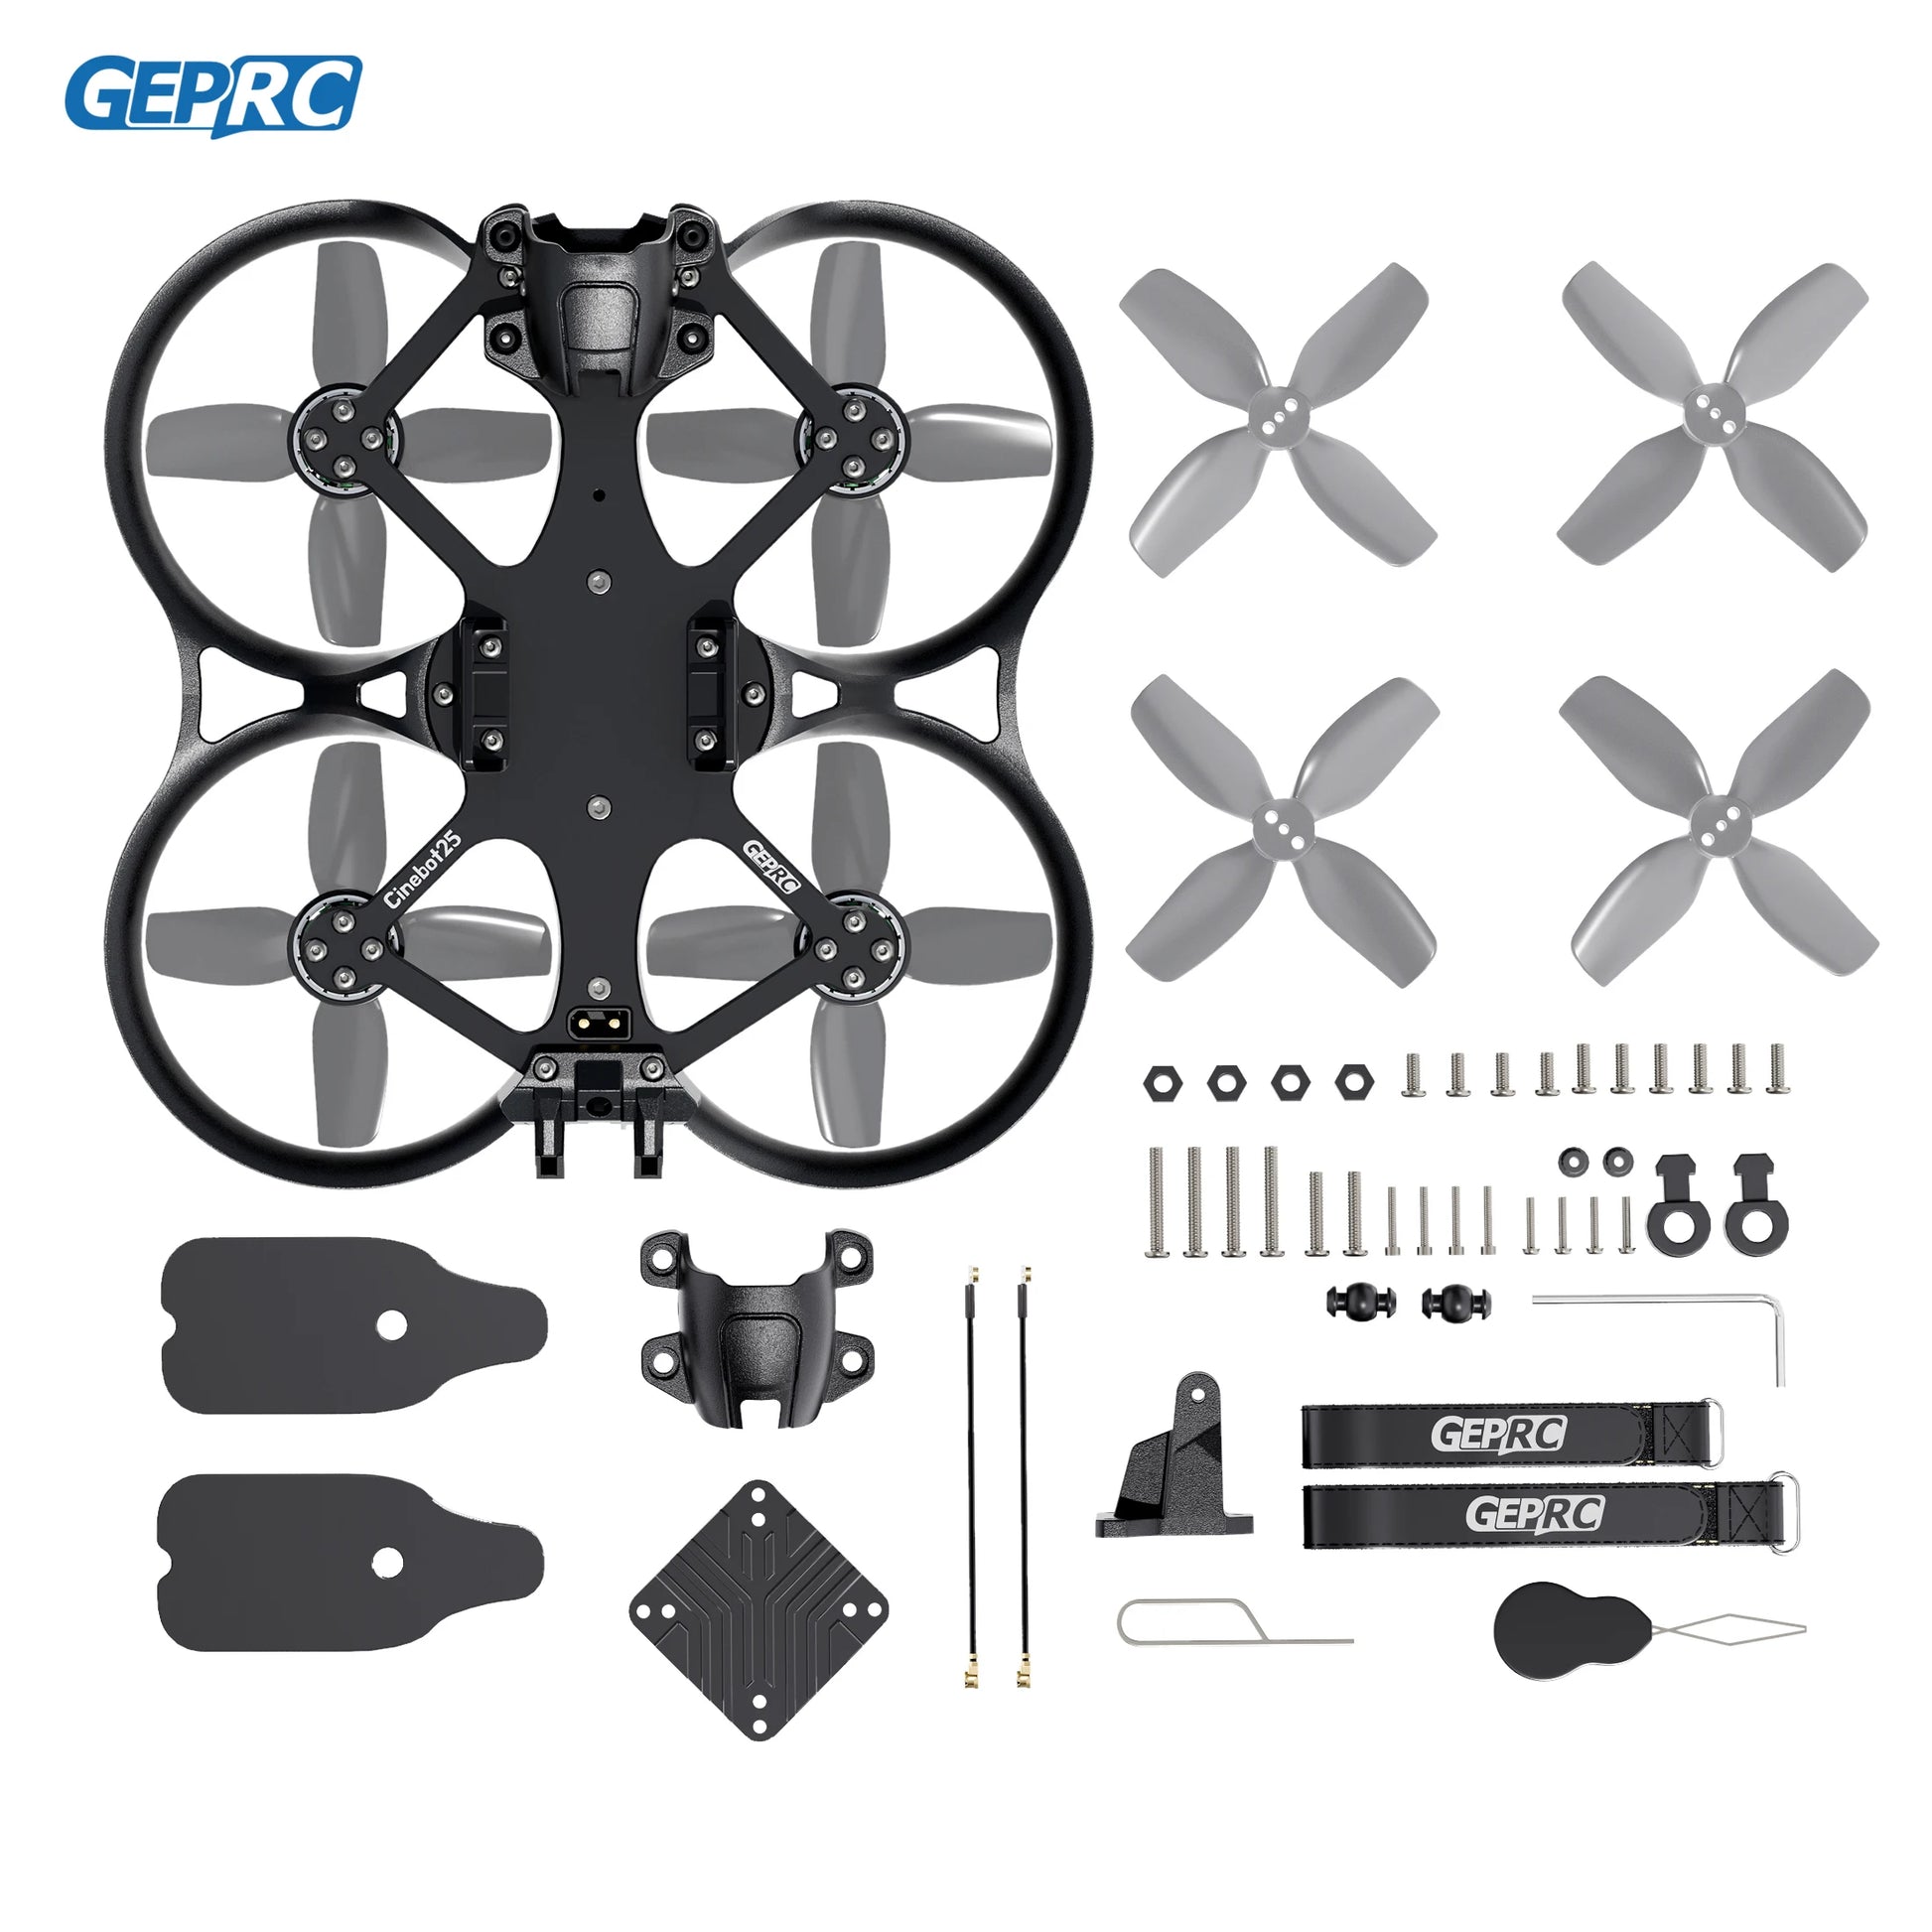 GEPRC Cinebot25 S WTFPV 2.5inch FPV Drone - G4 45A AIO FC ESC BLHeli 32Bit 45A RC 1505 4300KV Motor Racing Freestyle Quadcopter